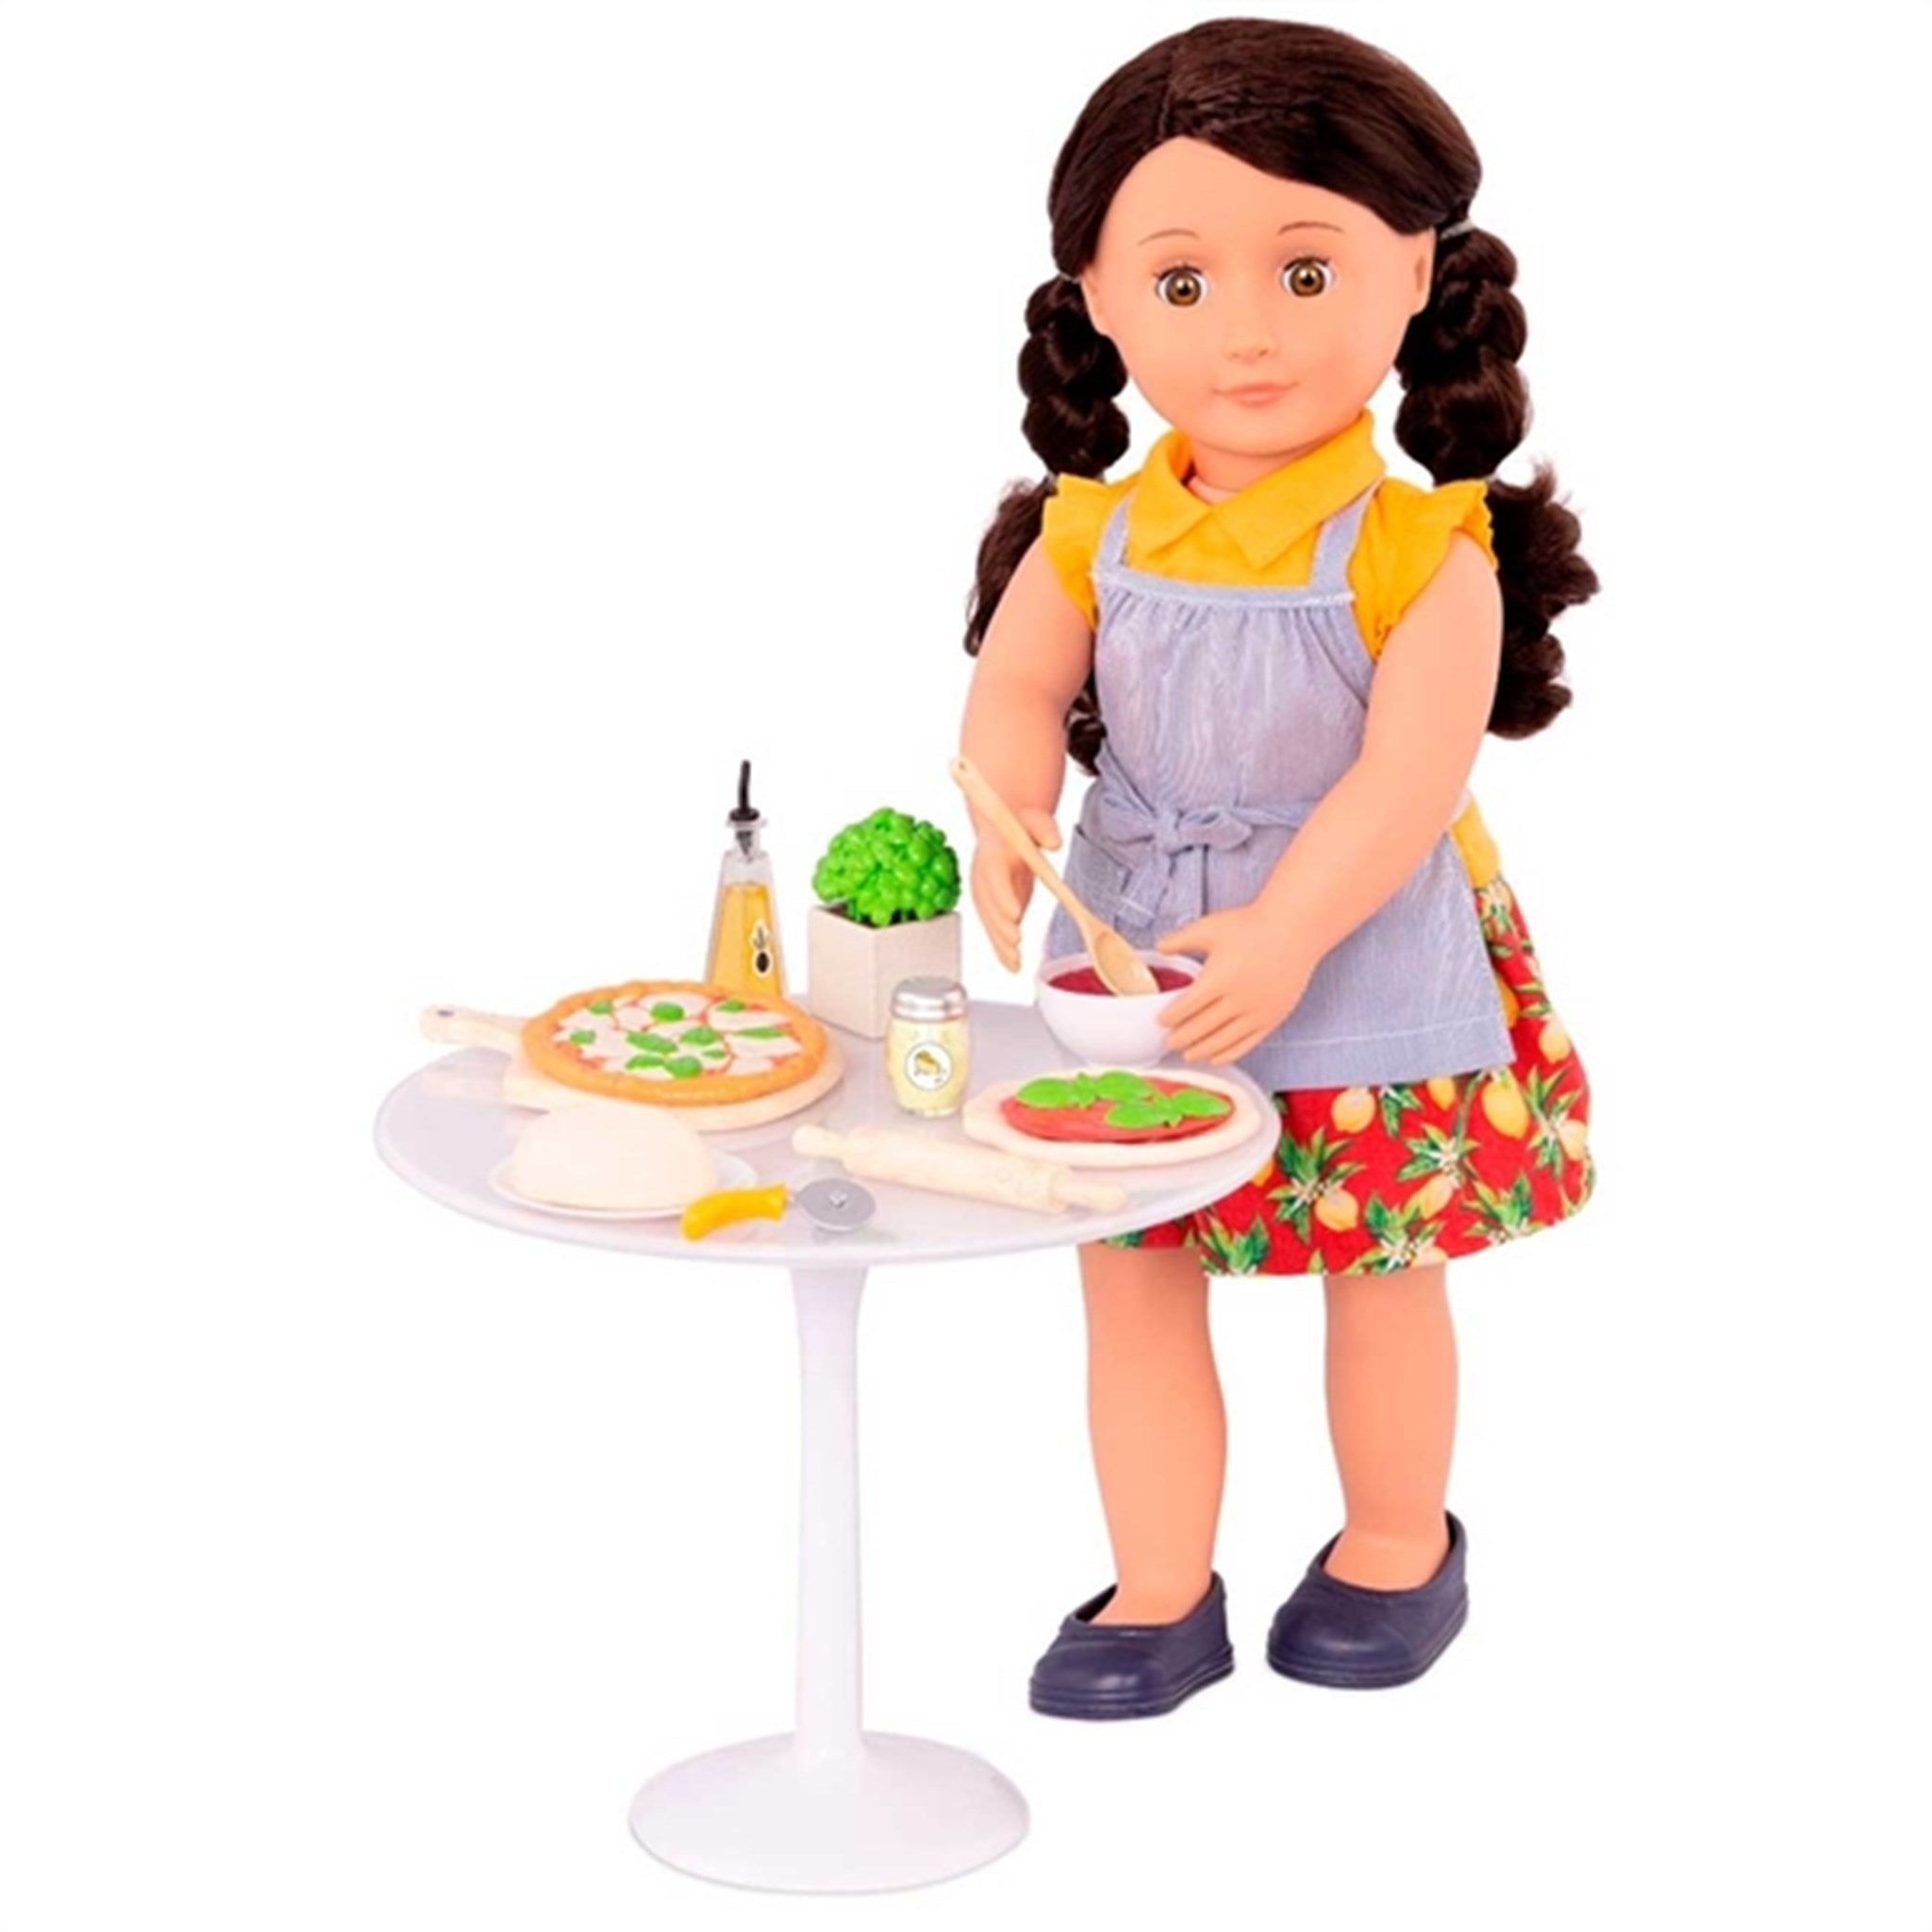 Our Generation Doll Accessories - Tasty Toppings 2